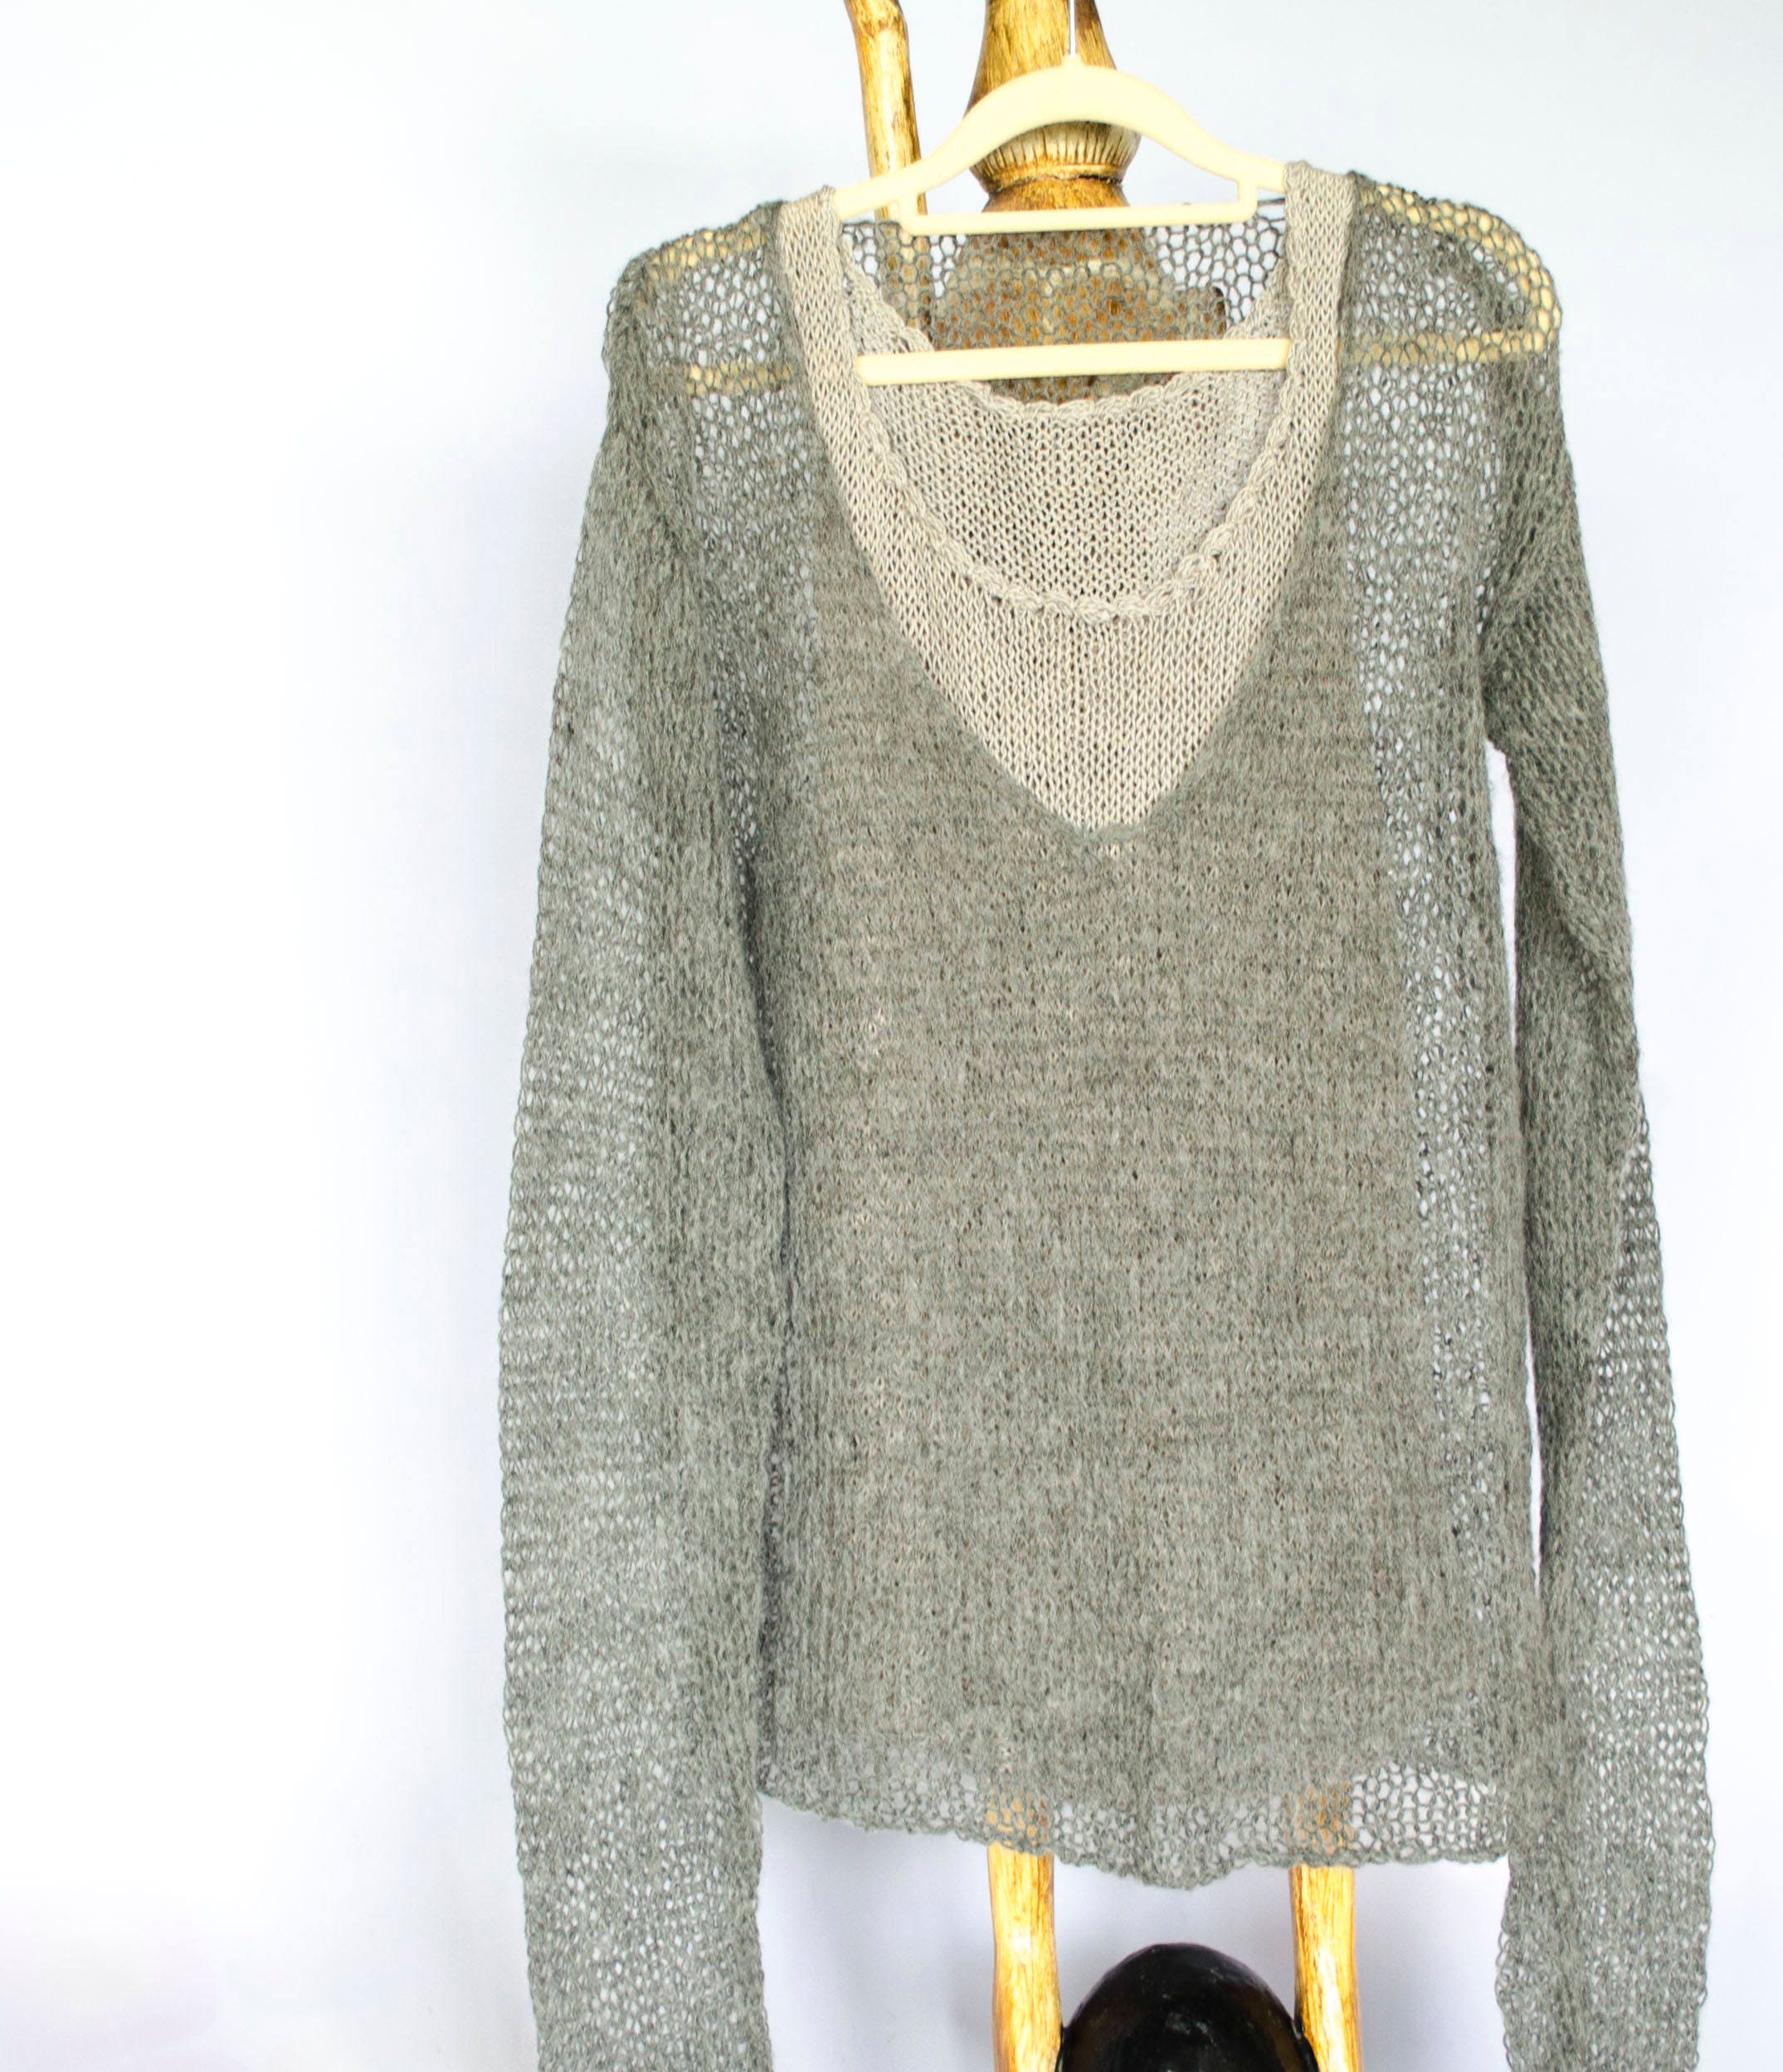 Mohair Sweater, Black Deep V Neck Mesh Knit Outfit, Unisex See 